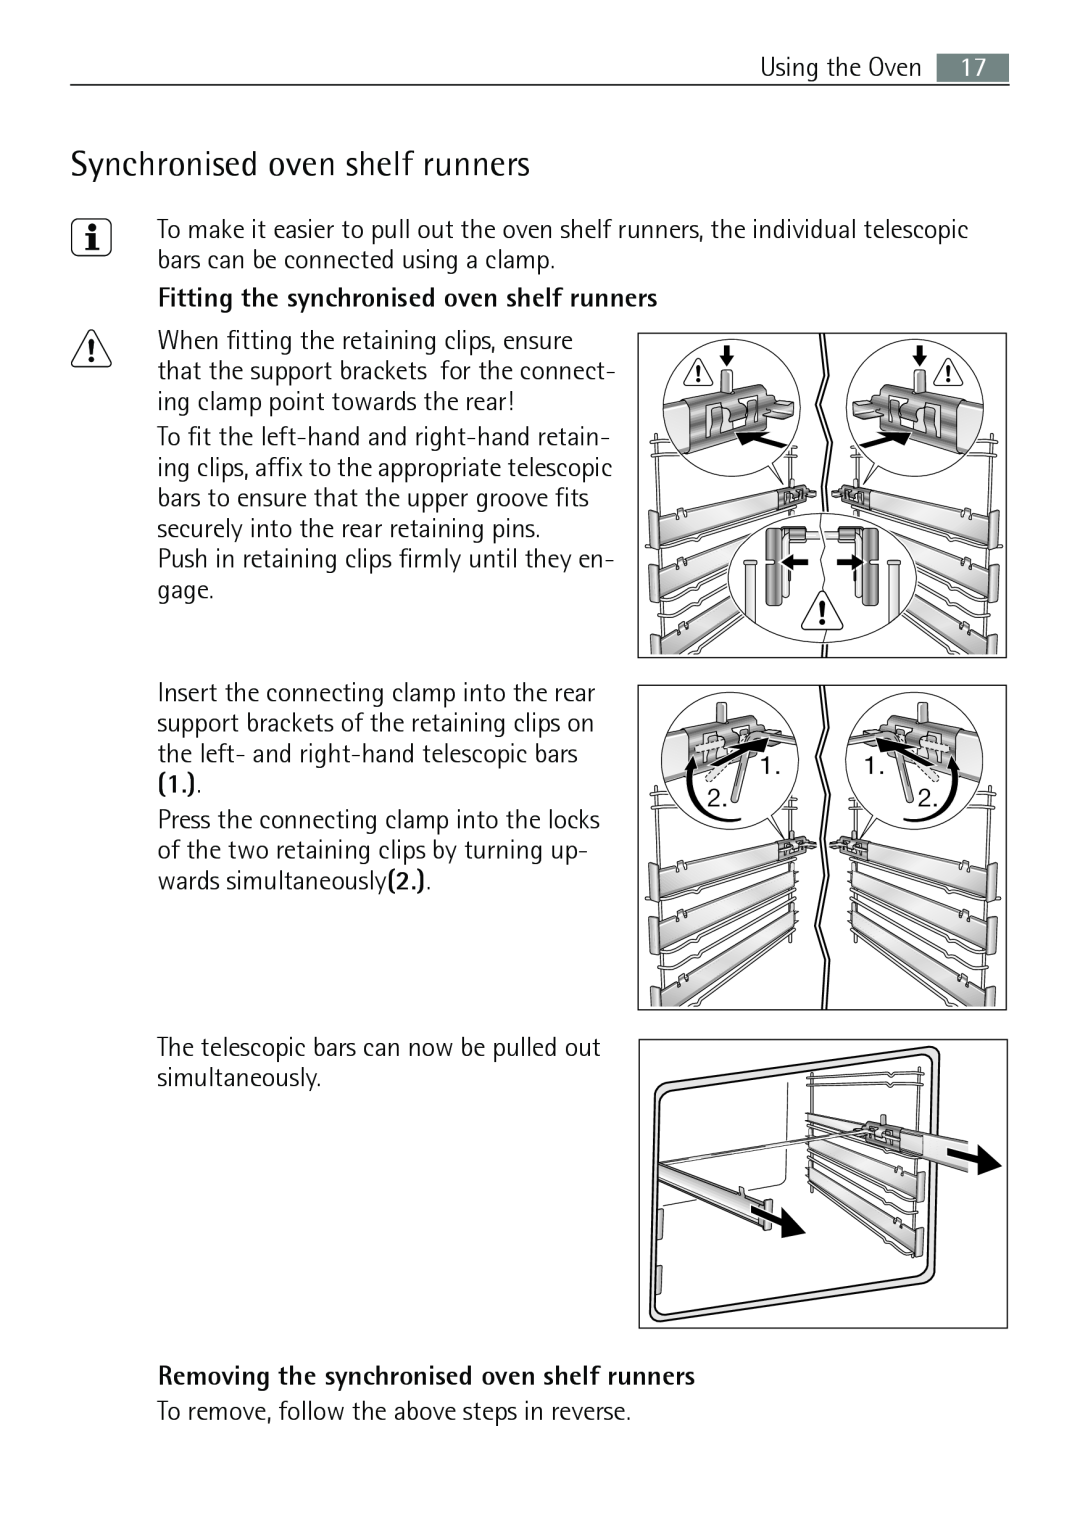 Electrolux E43012-5 user manual Synchronised oven shelf runners, Fitting the synchronised oven shelf runners 